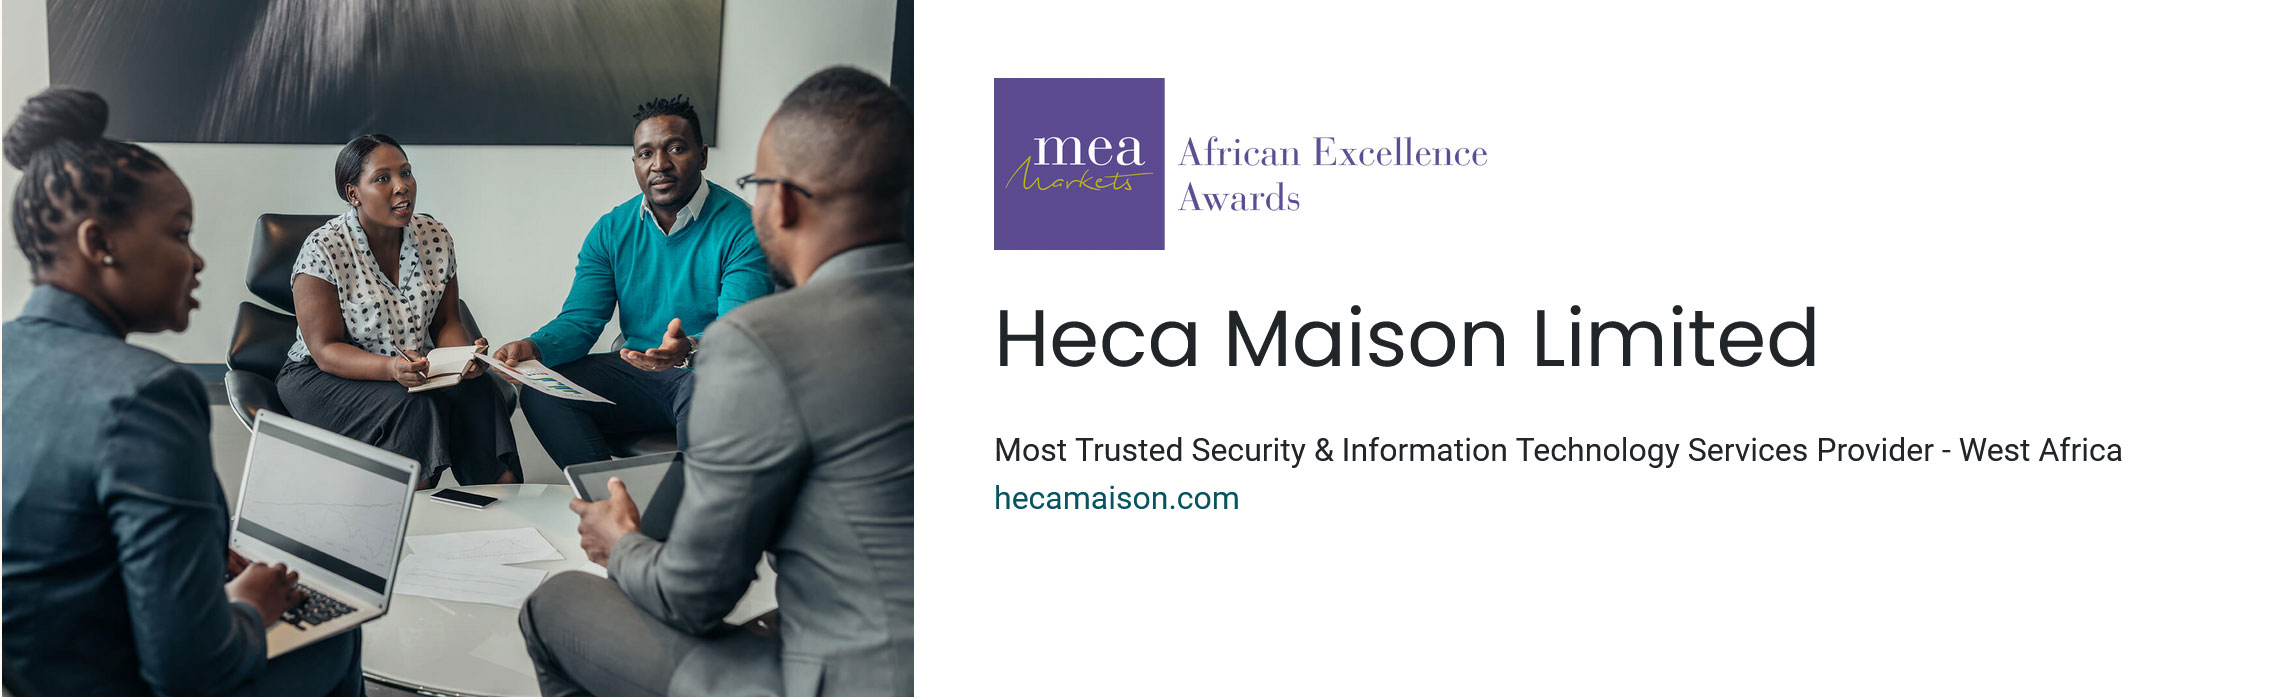 Most-Trusted-Security-&-Information-Technology-Services-Provider---West-Africa